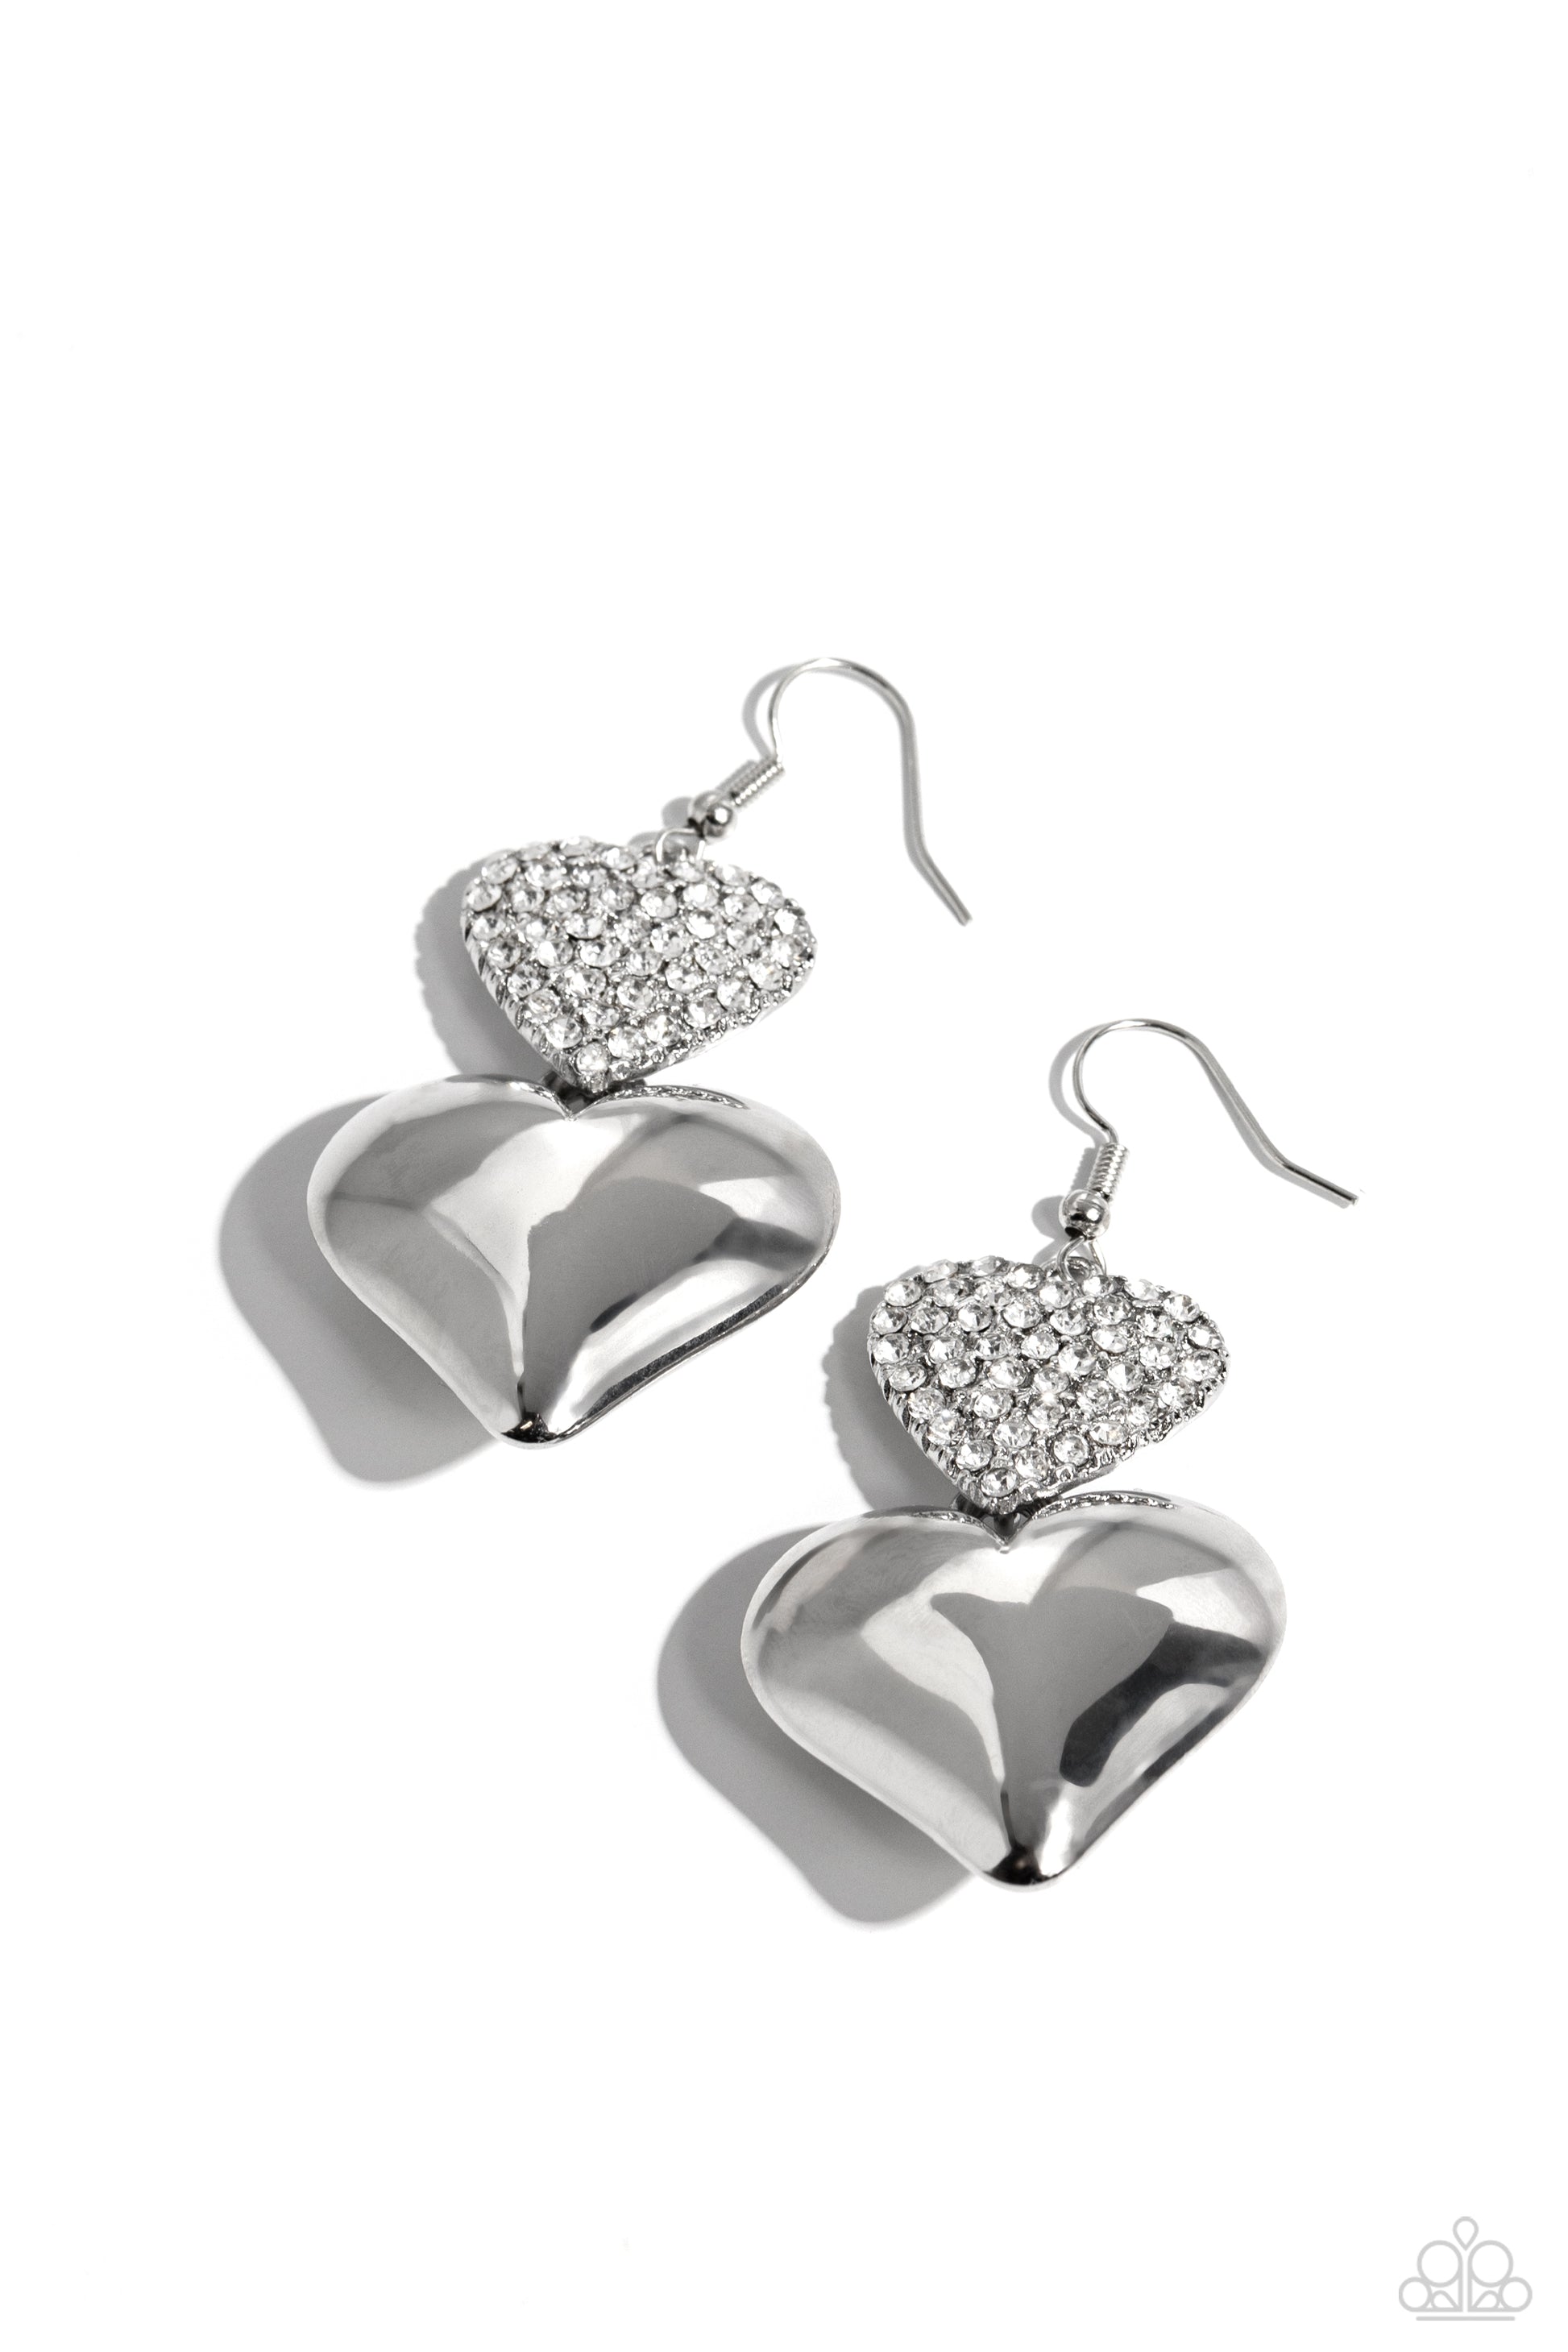 <p>Delicately dusted in white rhinestones, a blinding silver heart frame delicately links with a larger sleek silver heart for a flirtatiously layered look. Earring attaches to a standard fishhook earring.</p> <p><i> Sold as one pair of earrings.</i></p>